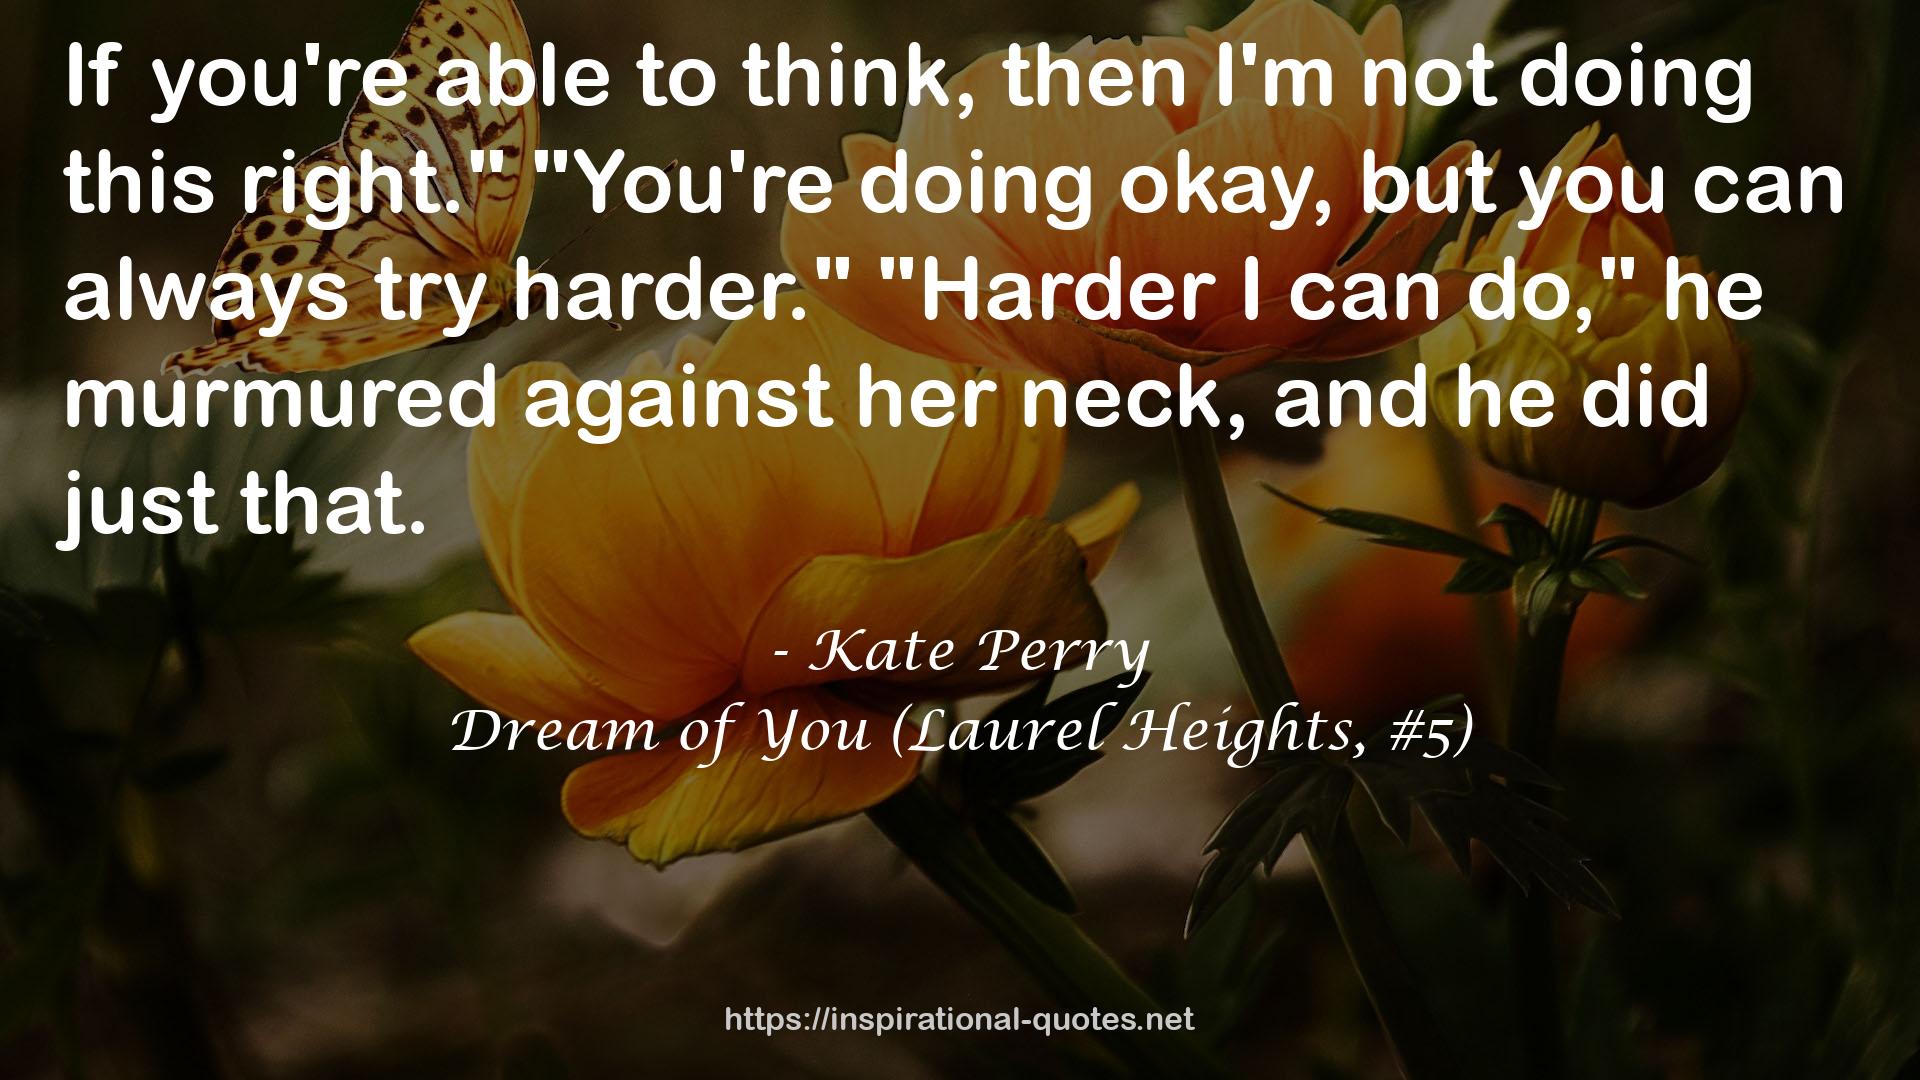 Dream of You (Laurel Heights, #5) QUOTES